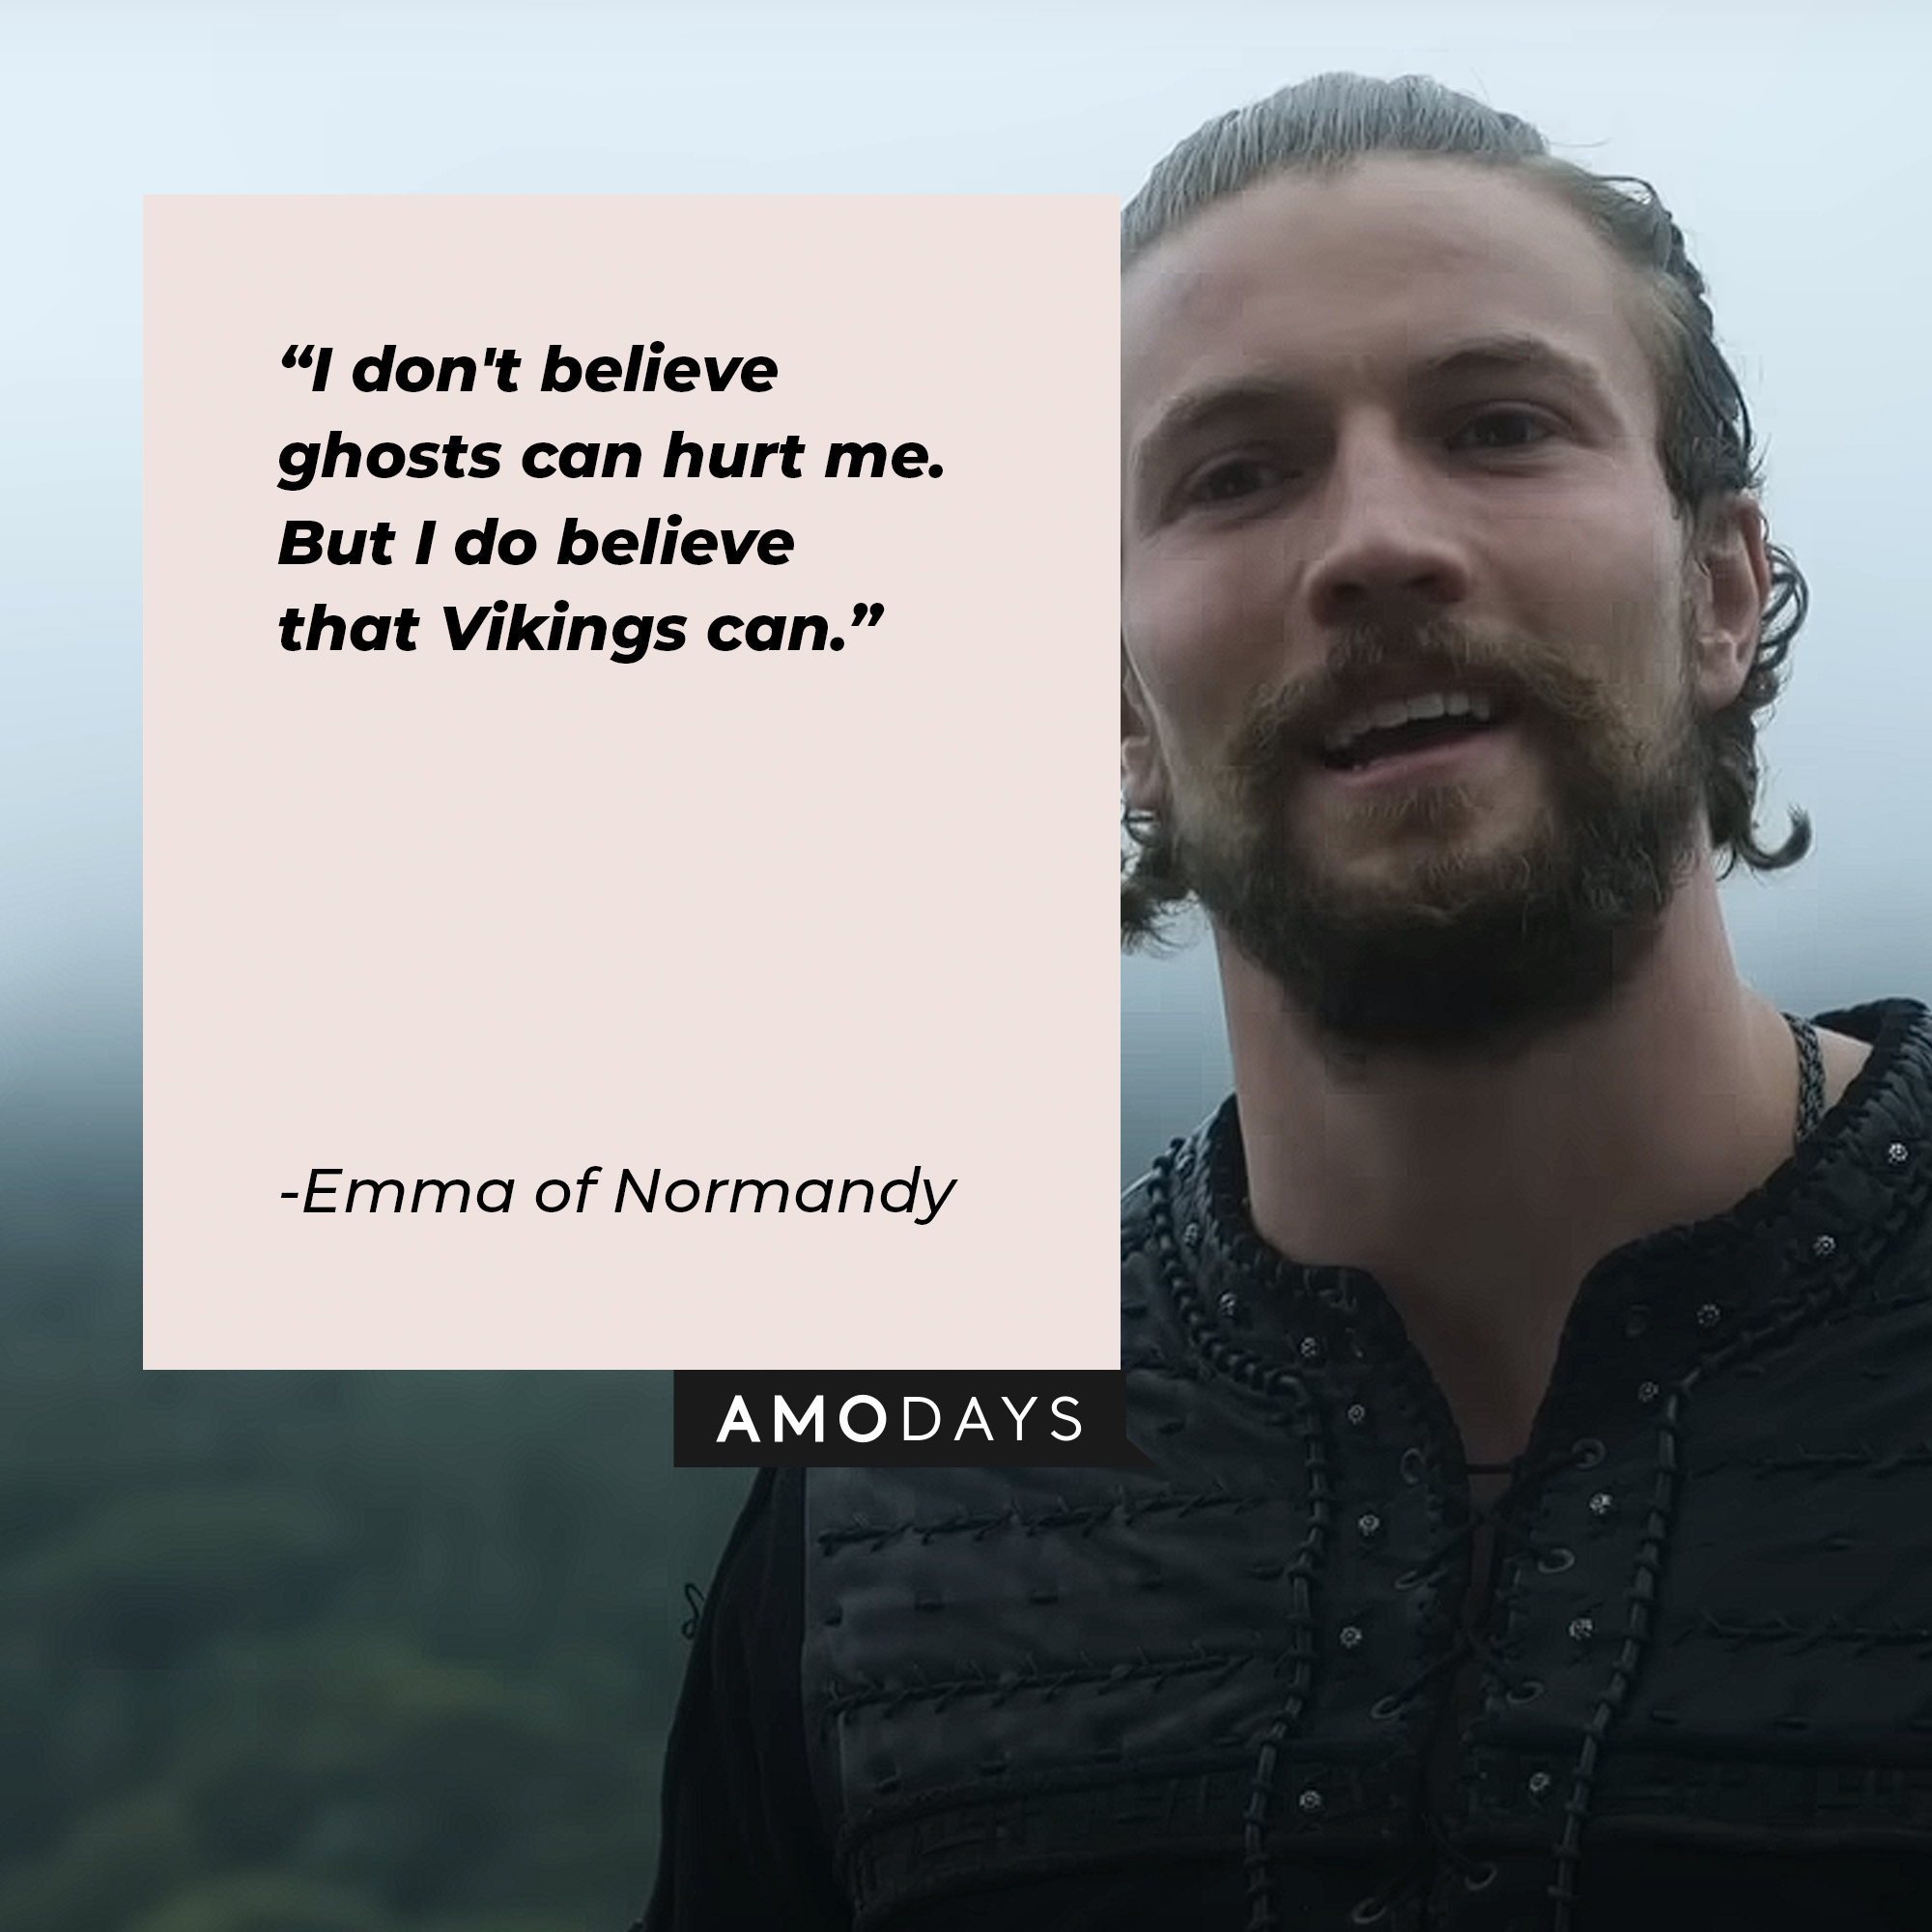 Emma of Normandy's quote: "I don't believe ghosts can hurt me. But I do believe that Vikings can." | Image: youtube.com/Netflix